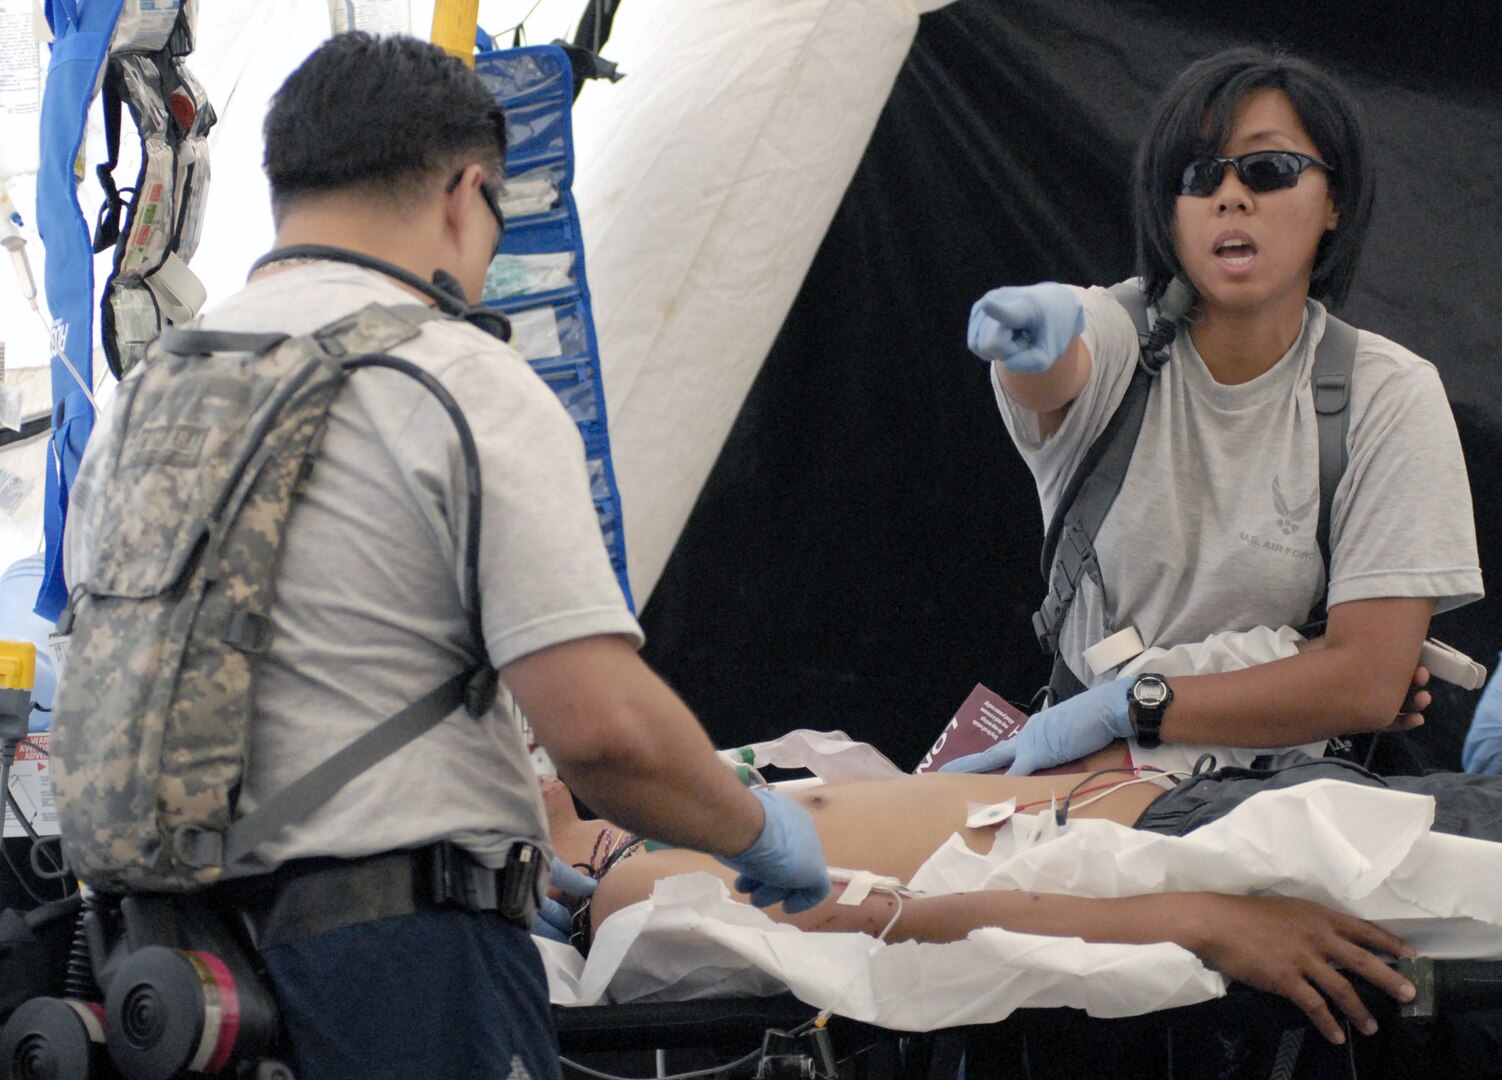 Airmen from the Hawaii Air National Guard's 154th Medical Group assist "victims" of a simulated dirty bomb detonation Dec. 16, 2010, at Bellows Air Force Station, Hawaii, during a homeland defense response validation exercise.